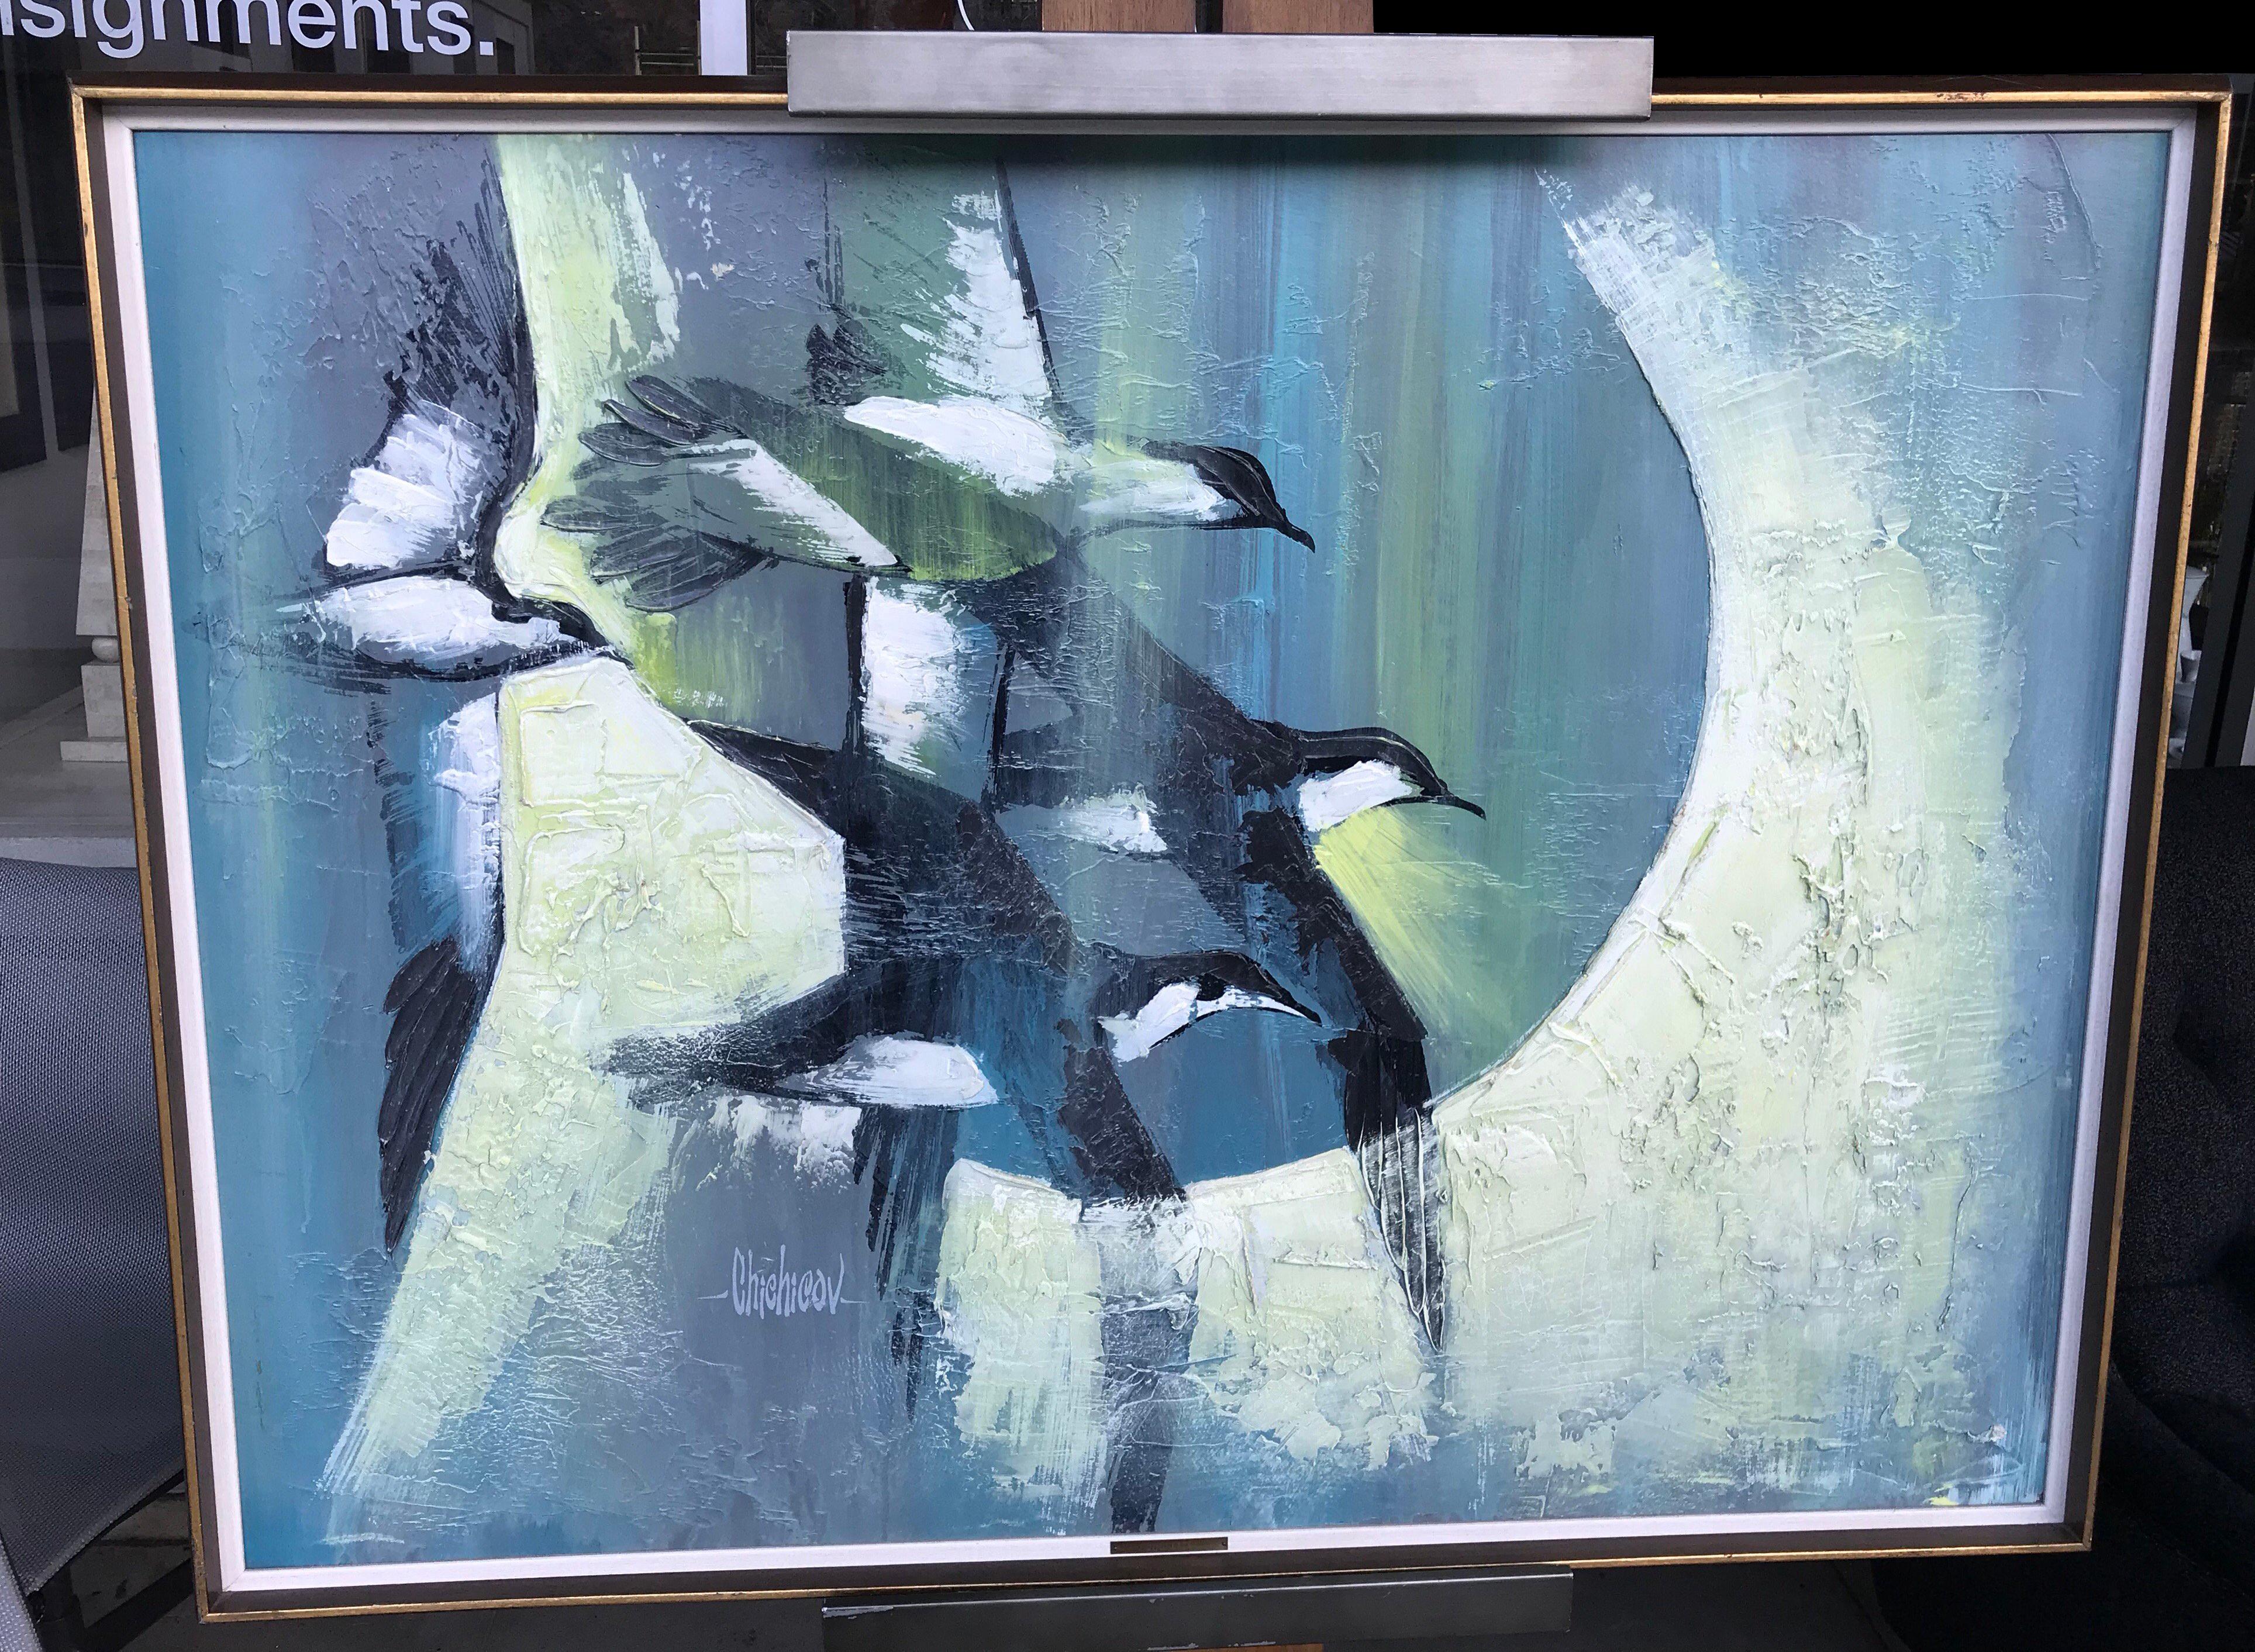 A midcentury original oil on board of geese in air by listed Romanian midcentury painter Chichicov. Beautiful blue and green colorations with original walnut frame. Titled on brass plaque. 